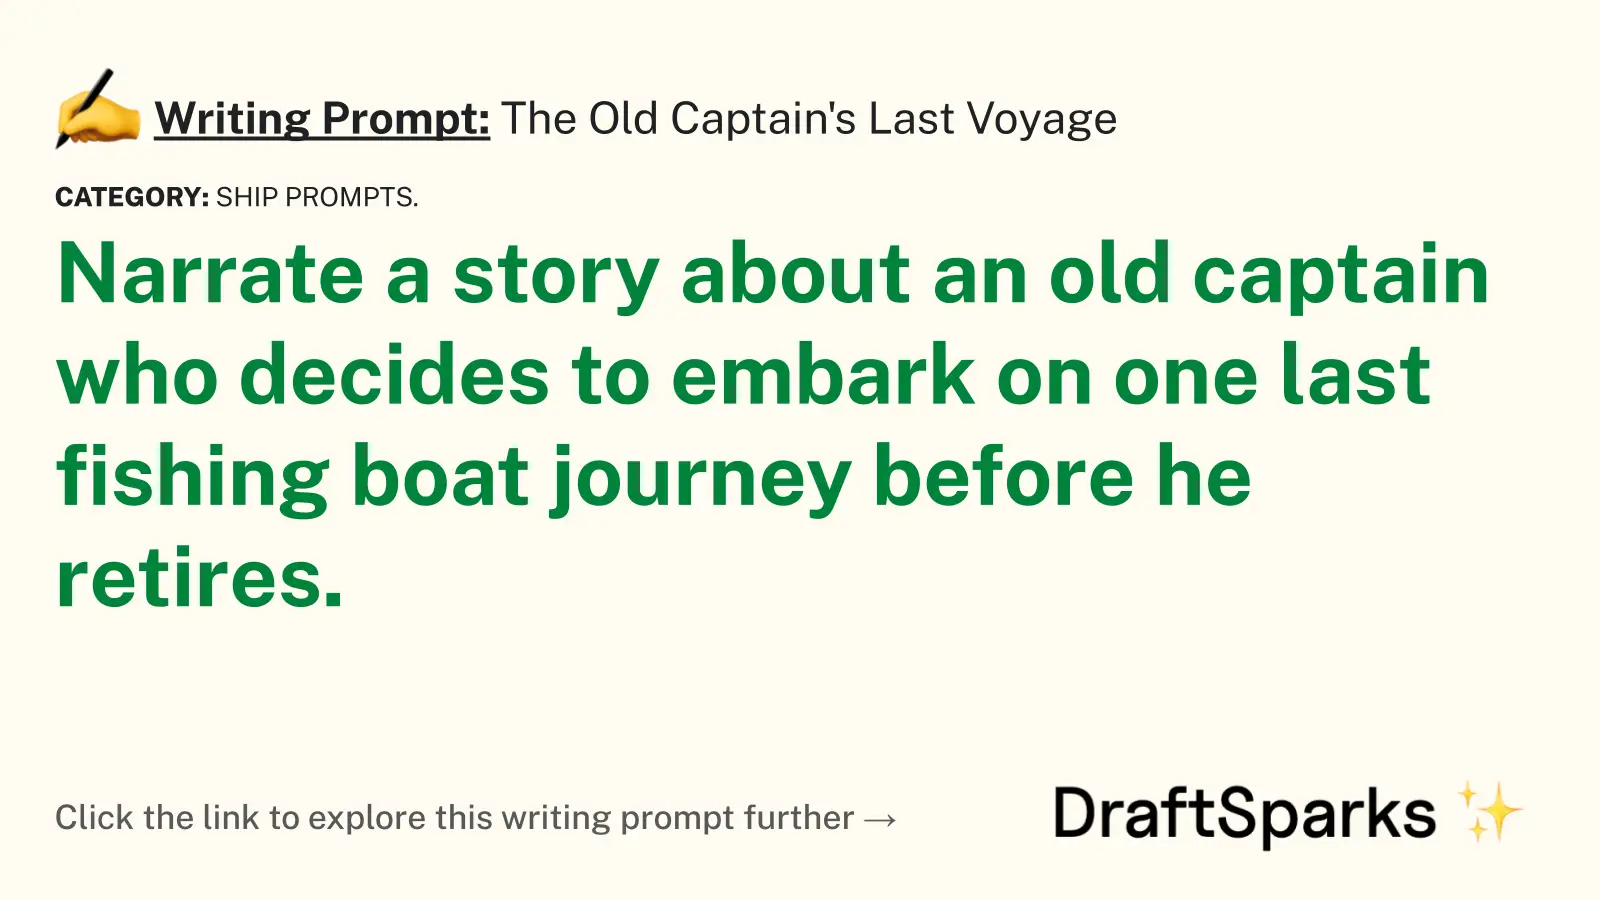 The Old Captain’s Last Voyage